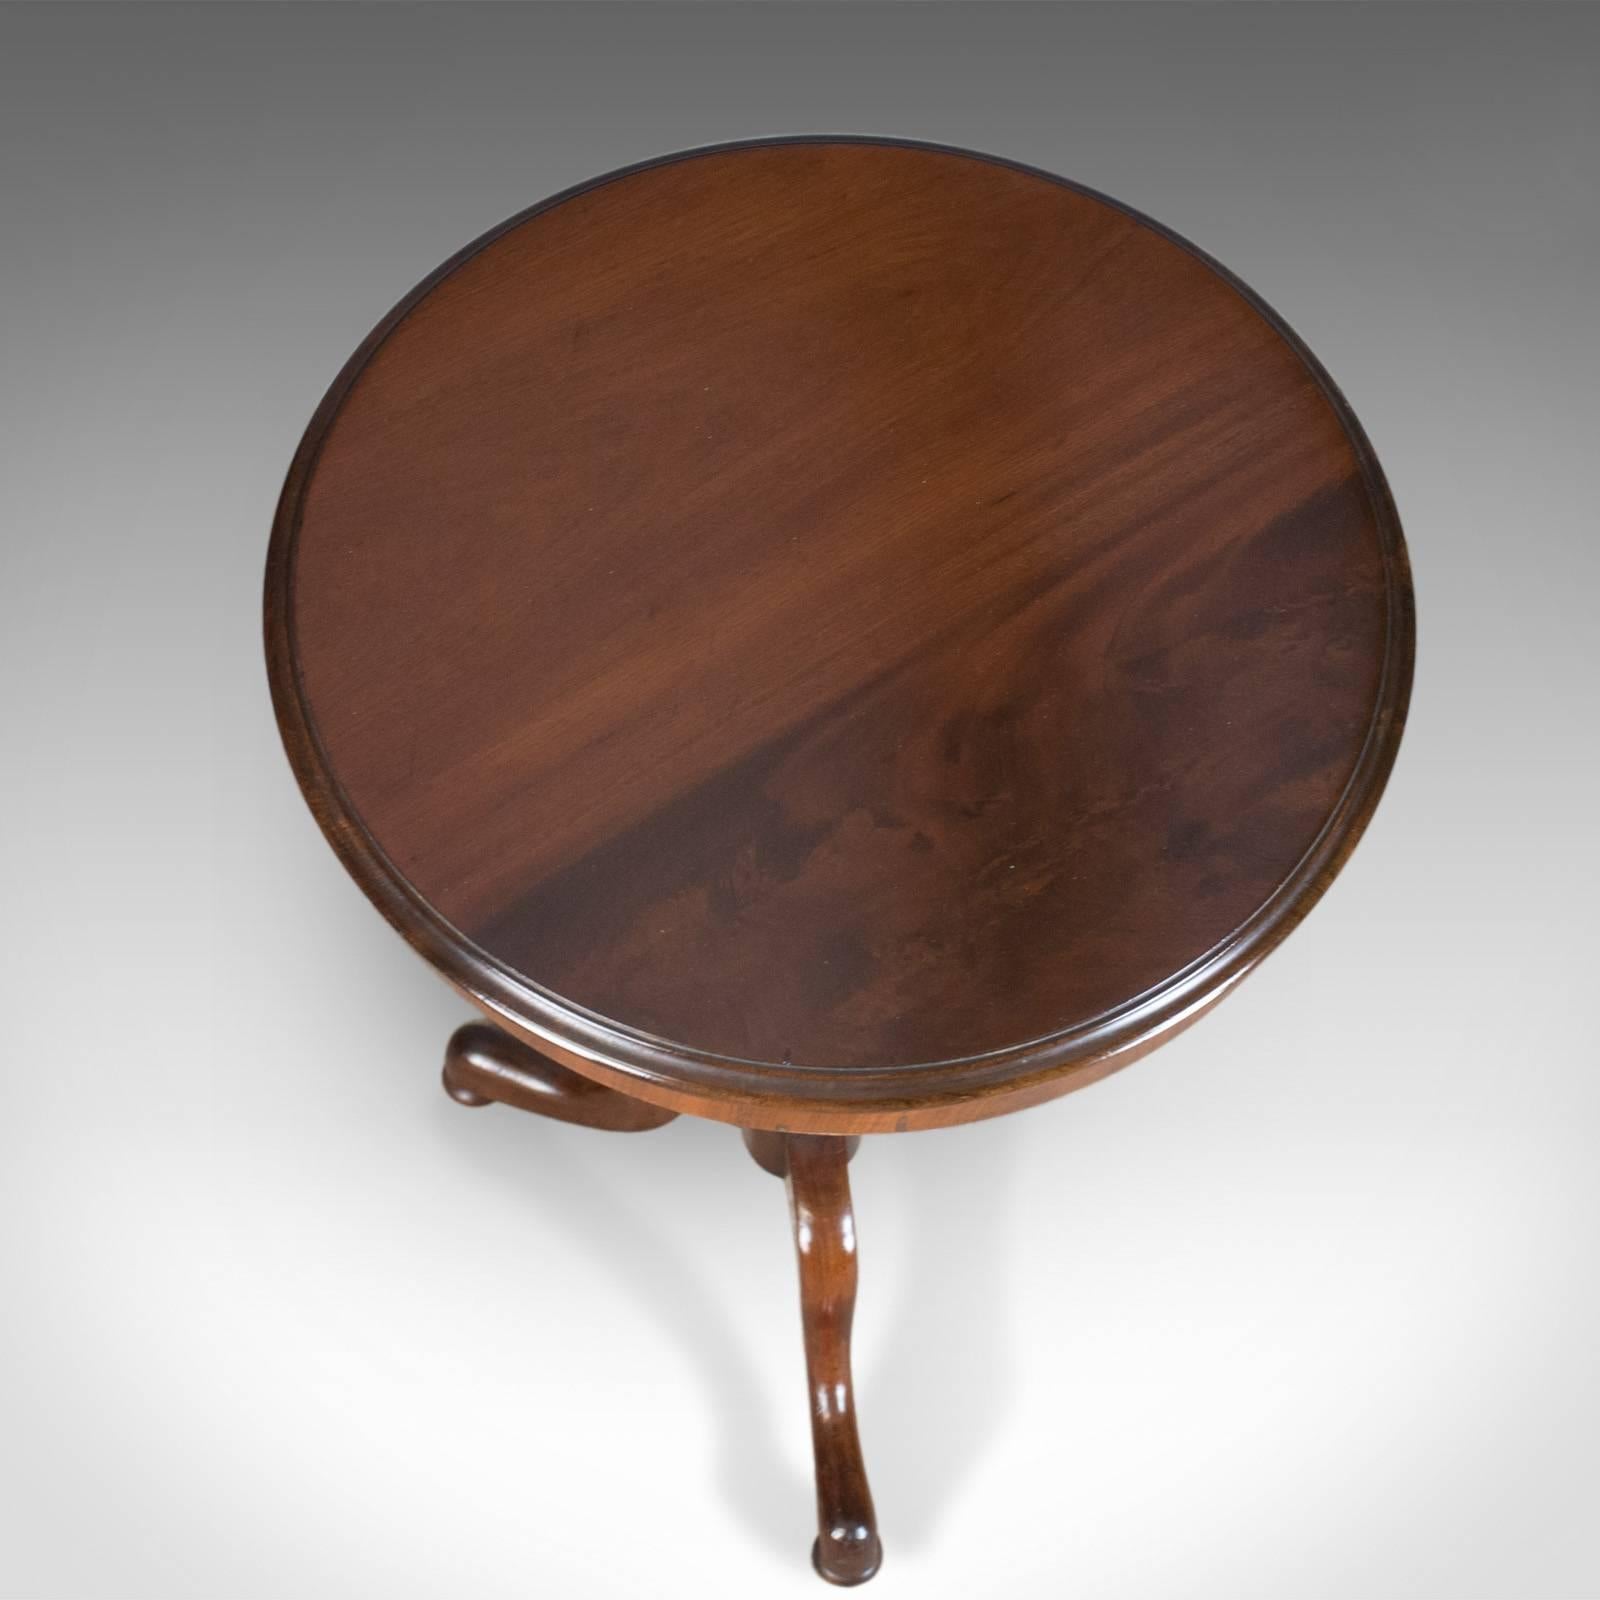 This is an antique wine table, an English, Regency, circular, side table in mahogany dating to circa 1830.

Crafted in select stocks of quality mahogany
Good color and grain interest in a lustrous wax polished finish
Of quality craftsmanship